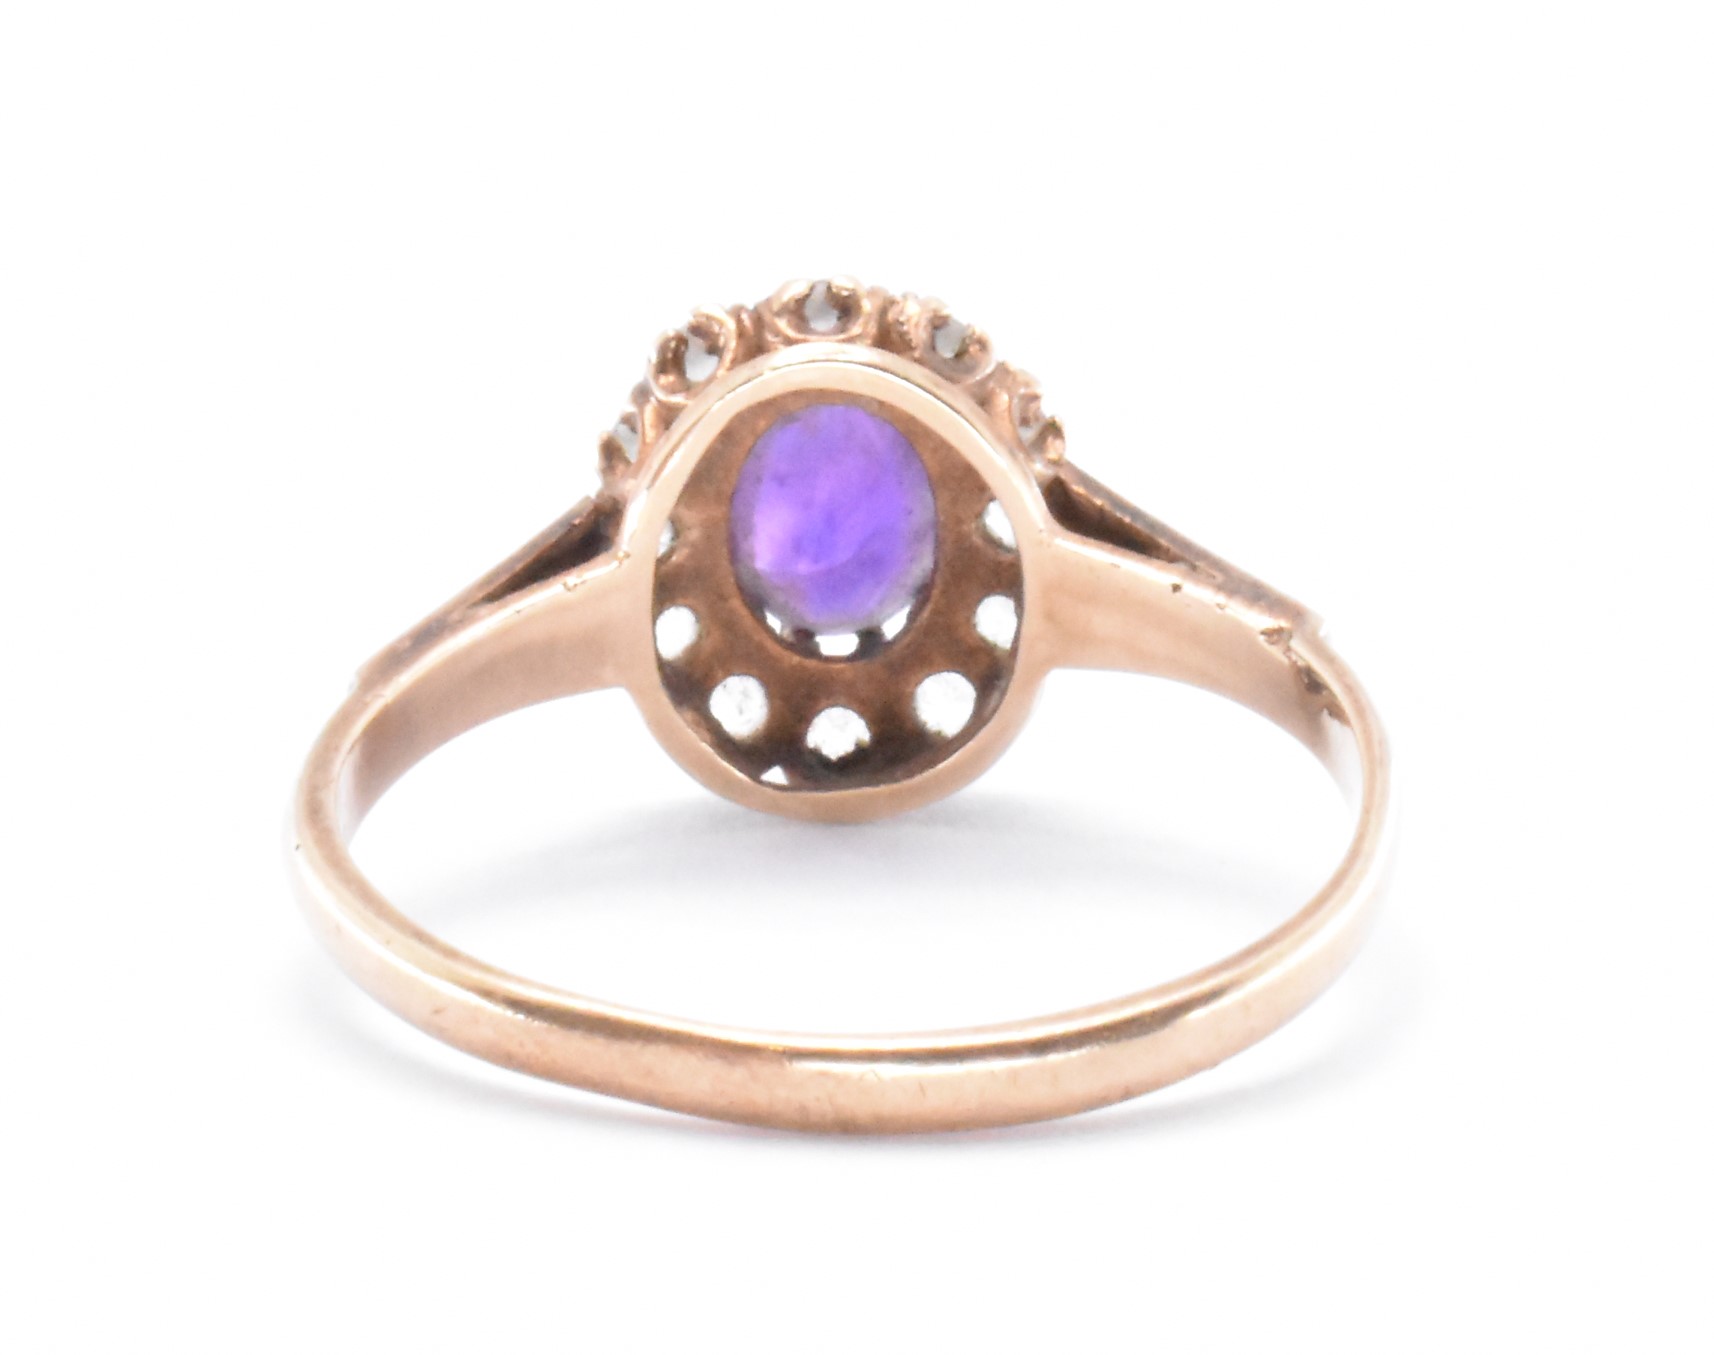 GOLD AMETHYST & WHITE STONE CLUSTER RING - Image 3 of 6